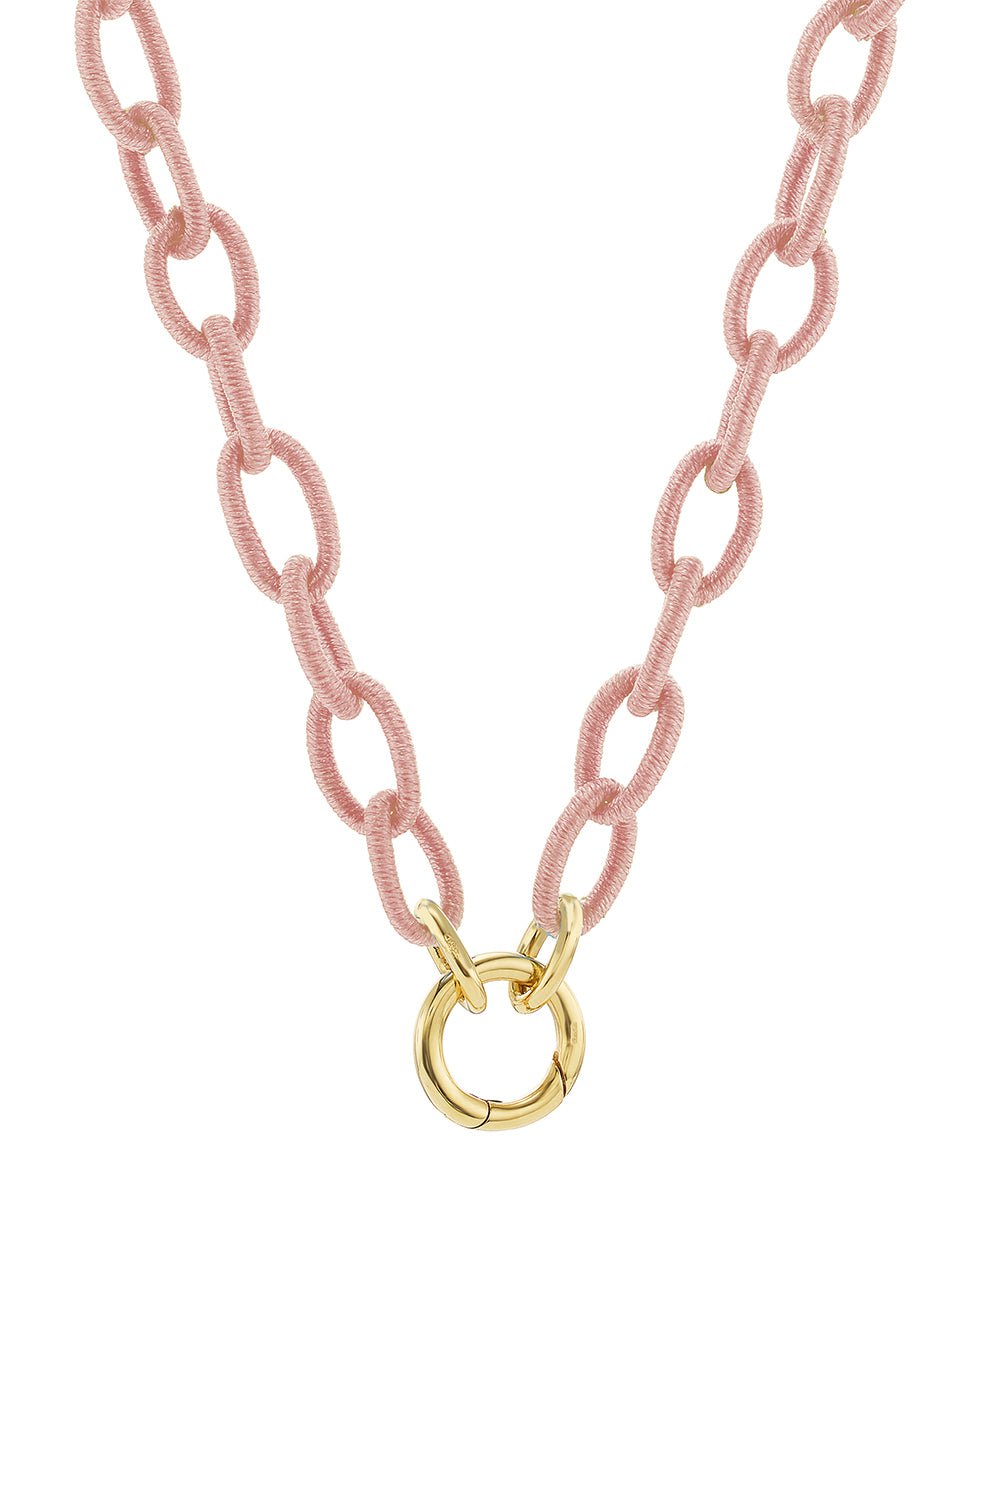 ANNA MACCIERI ROSSI-Pale Pink Thread Link Necklace-YELLOW GOLD